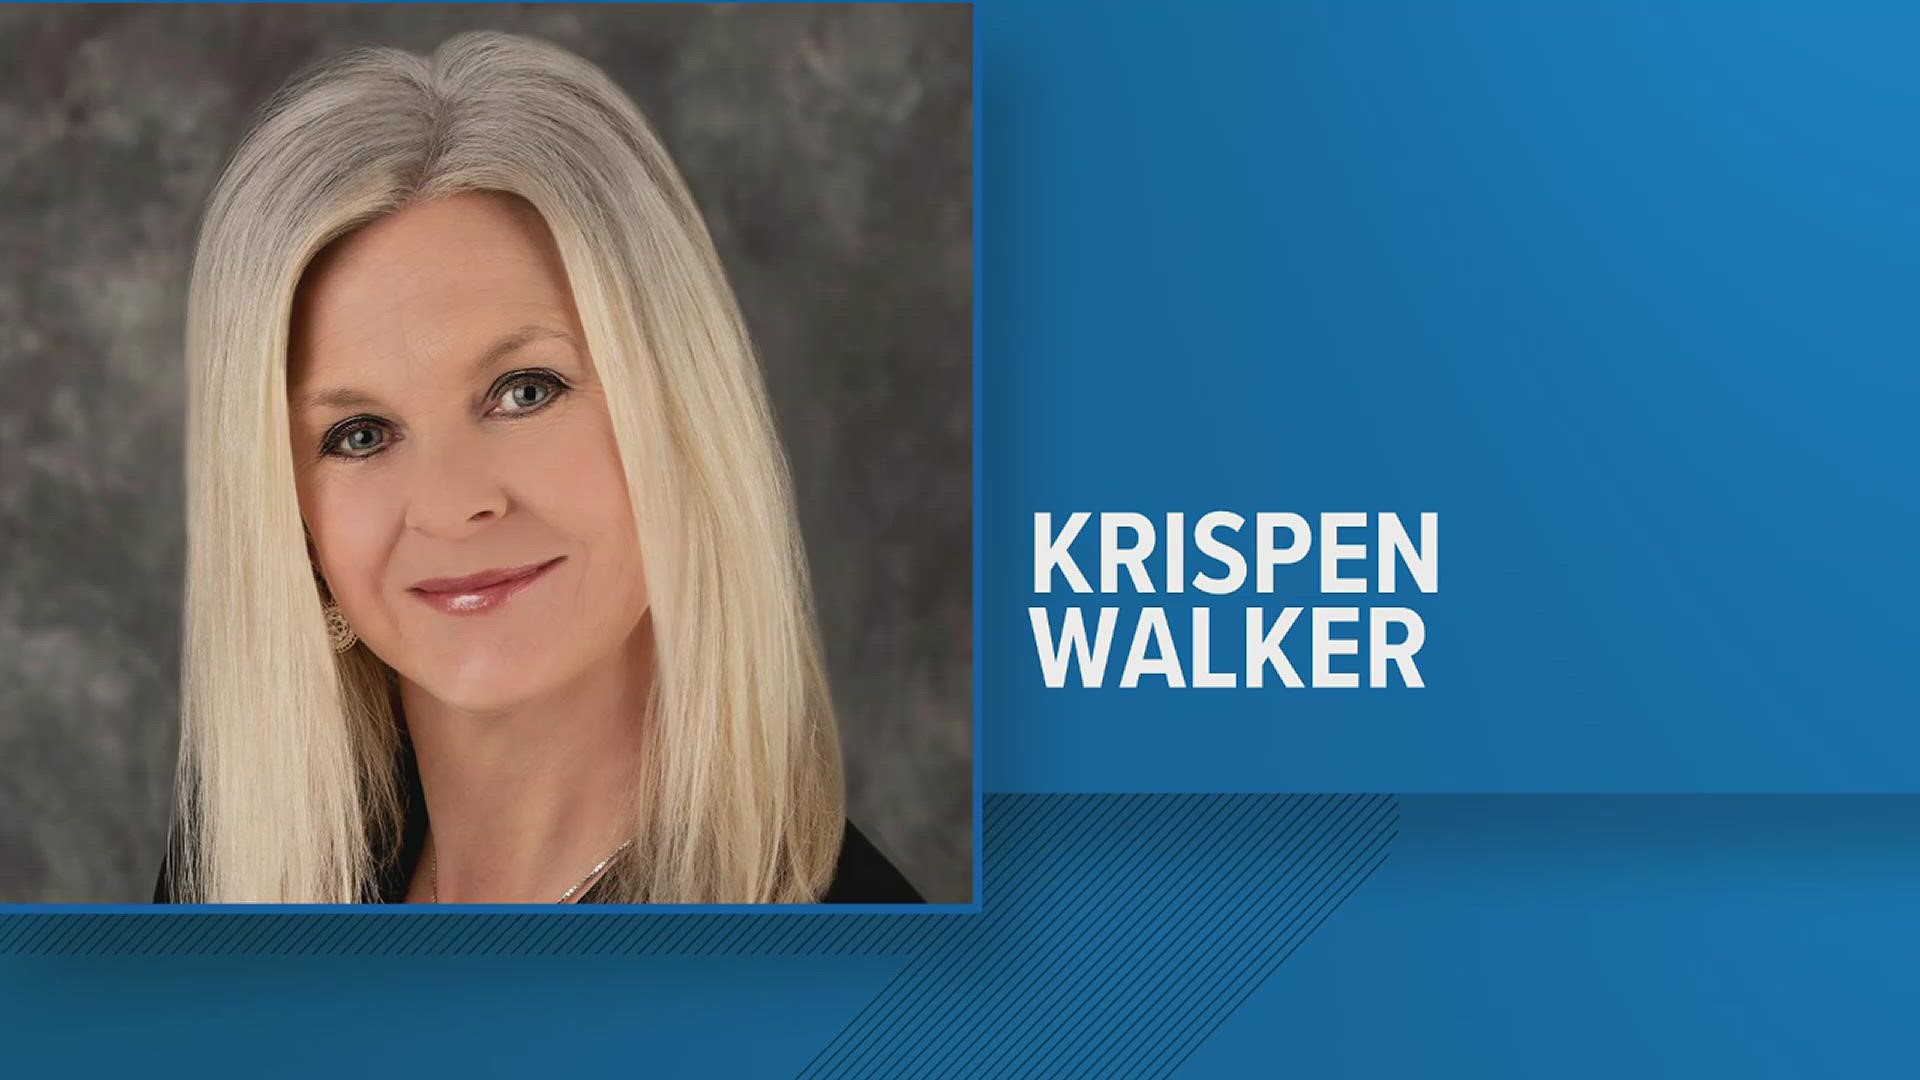 Krispen Walker announced her candidacy for district attorney Monday. Currently, Walker is the first assistant district attorney.